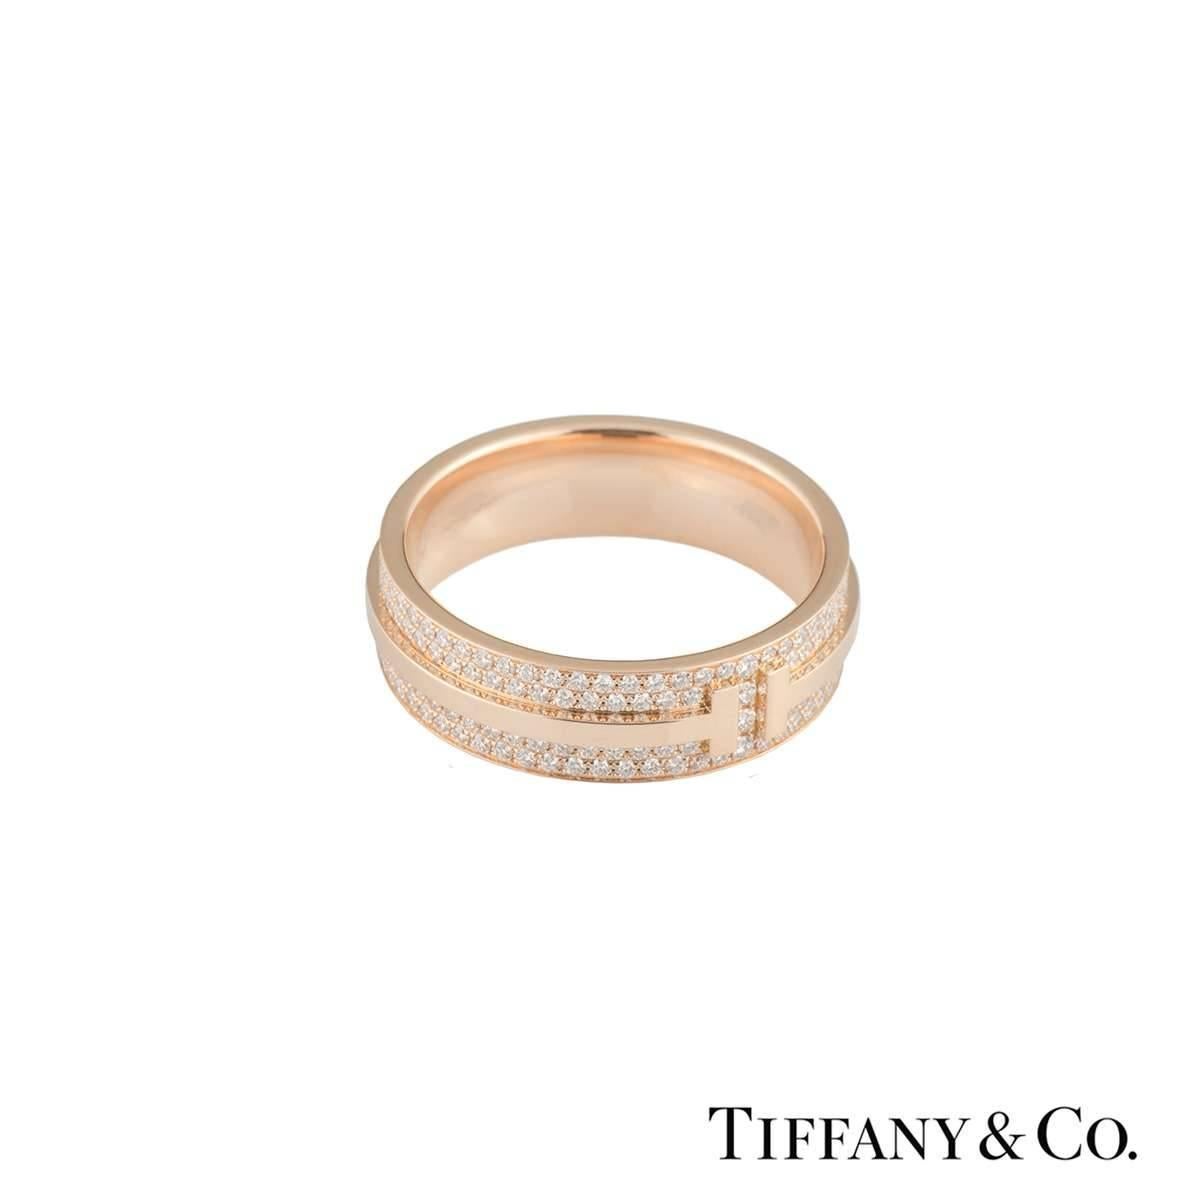 An 18k rose gold T Two ring by Tiffany & Co. The ring features a polished double T motif to the front and has a diamond set boarder. The pave set round brilliant cut diamonds total 0.57ct, are G colour and VS in clarity. The 6mm ring is a US size 6